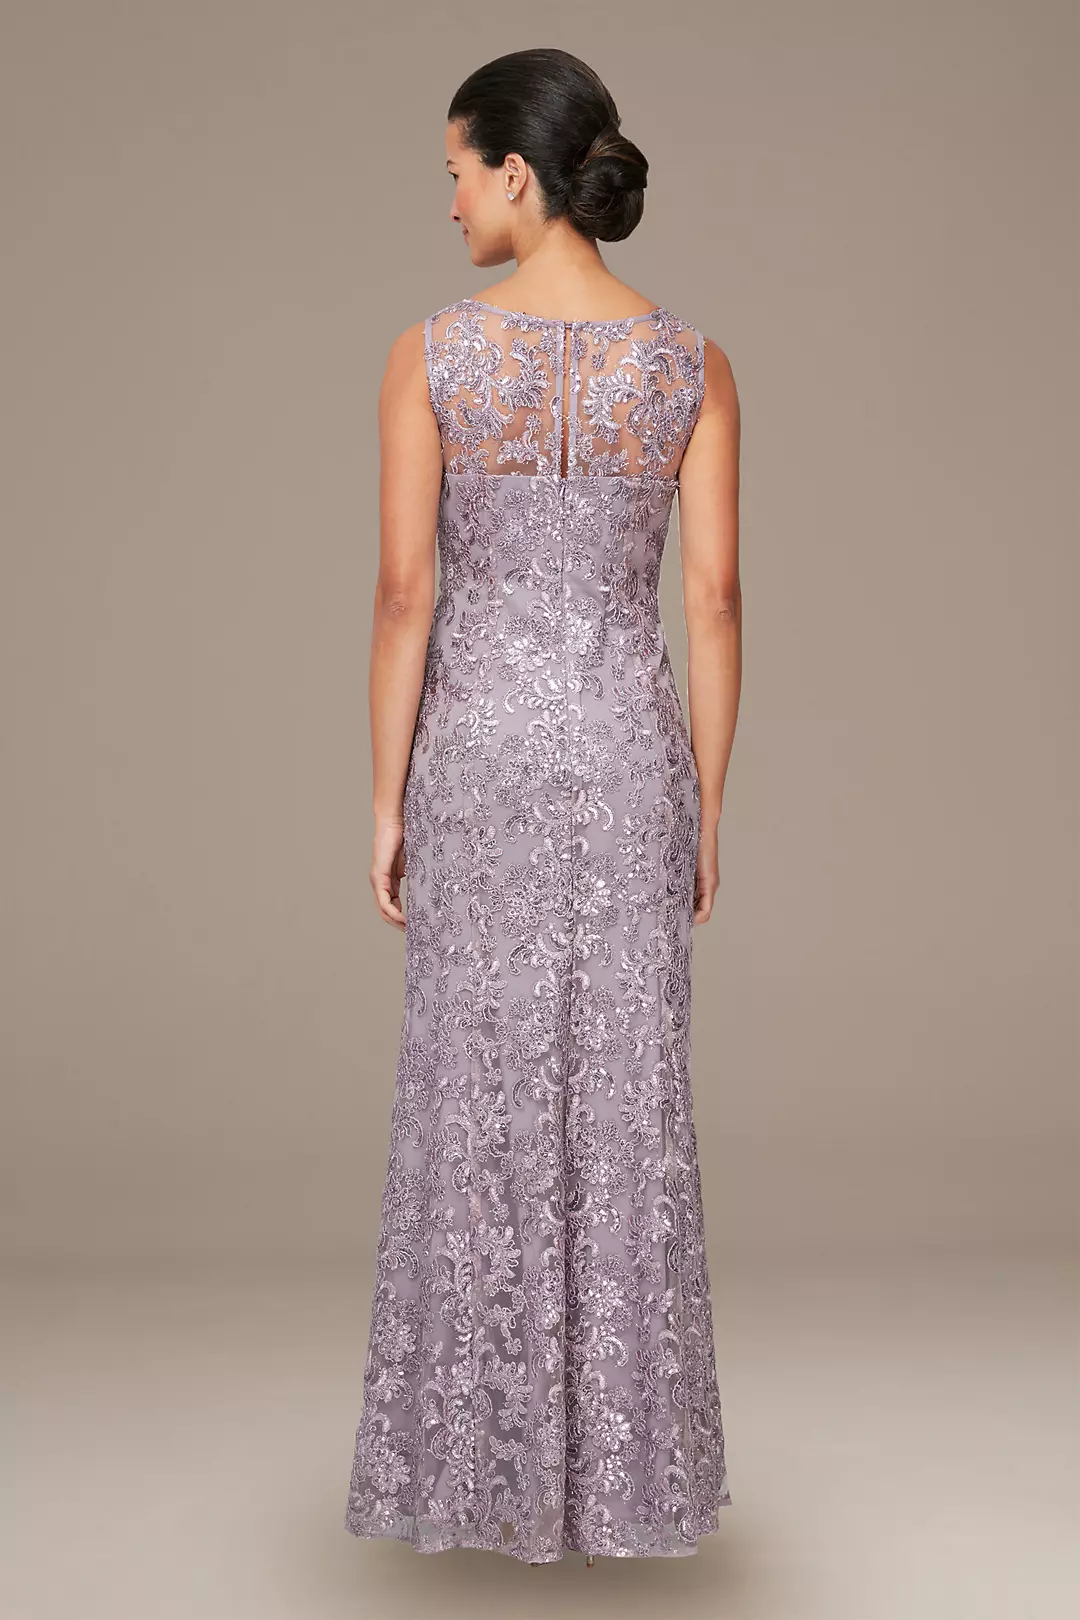 Embroidered Mesh Illusion Gown with Matching Shawl Image 2